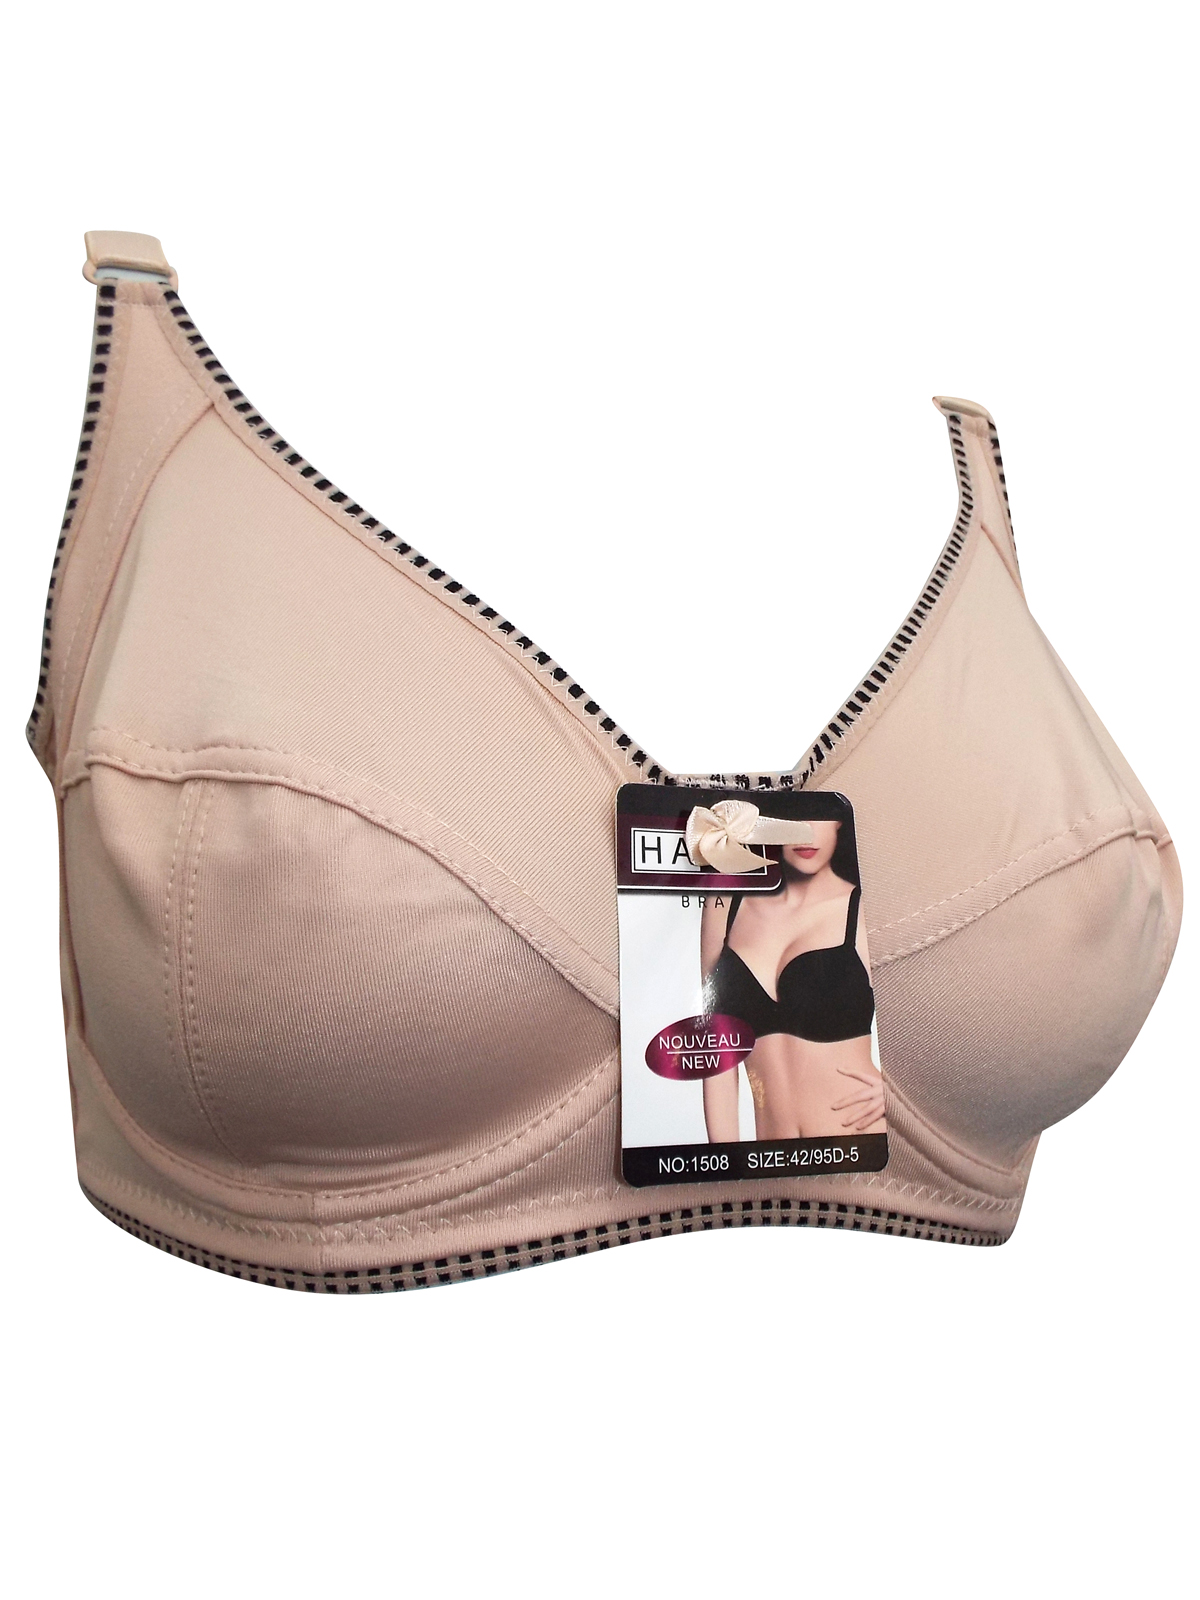 Hana - - Hana NATURAL Contrast Trim Underwired Full Cup Bra - Size 42 to 52  (D cup)